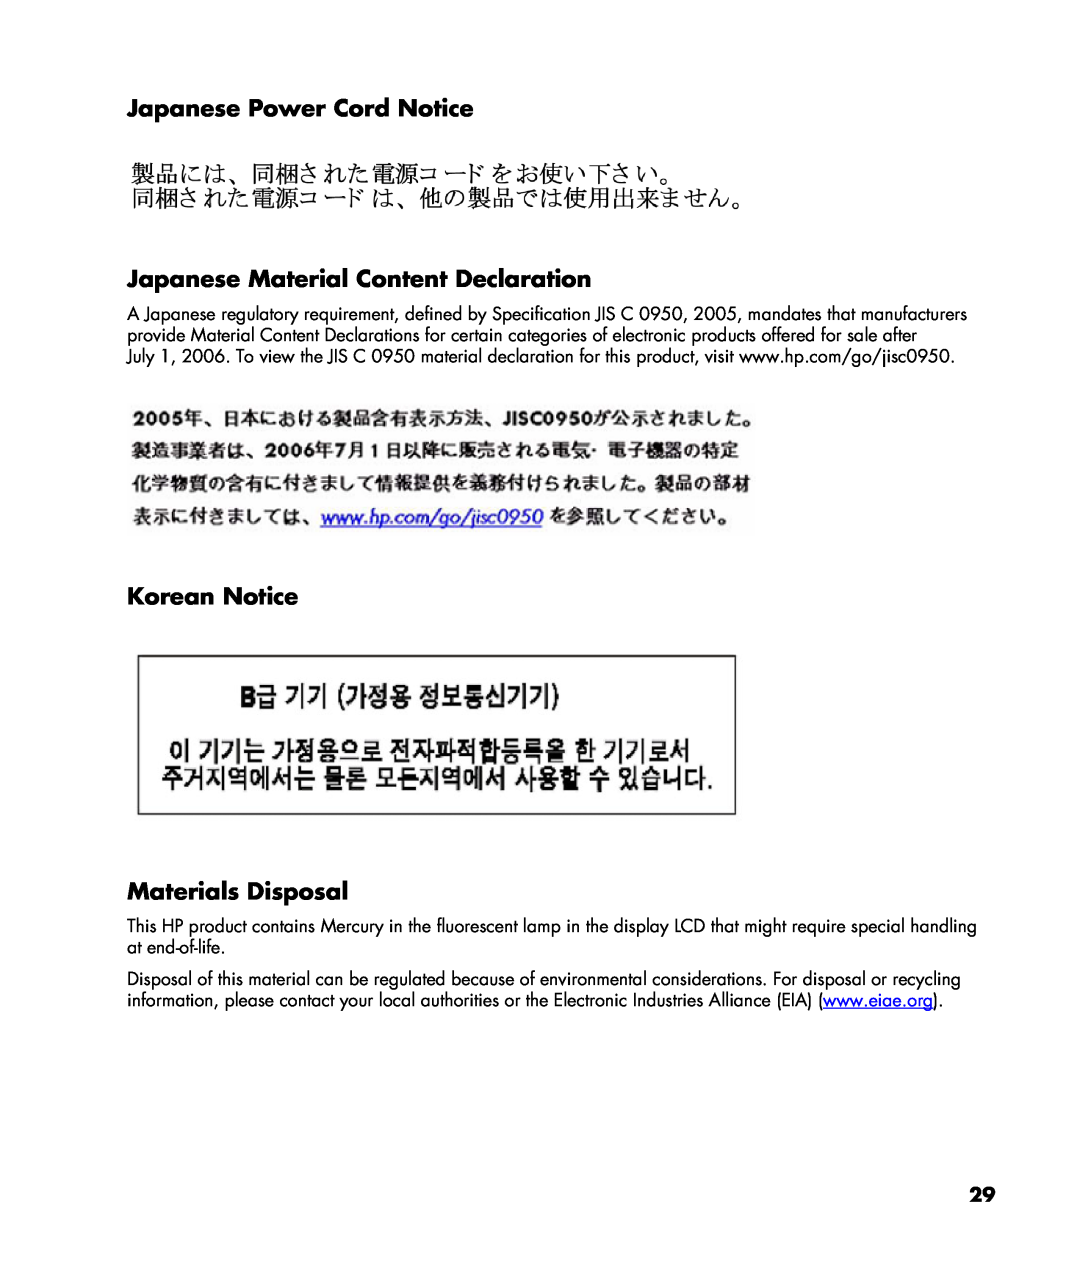 HP w20, w22 manual Japanese Power Cord Notice Japanese Material Content Declaration, Korean Notice Materials Disposal 